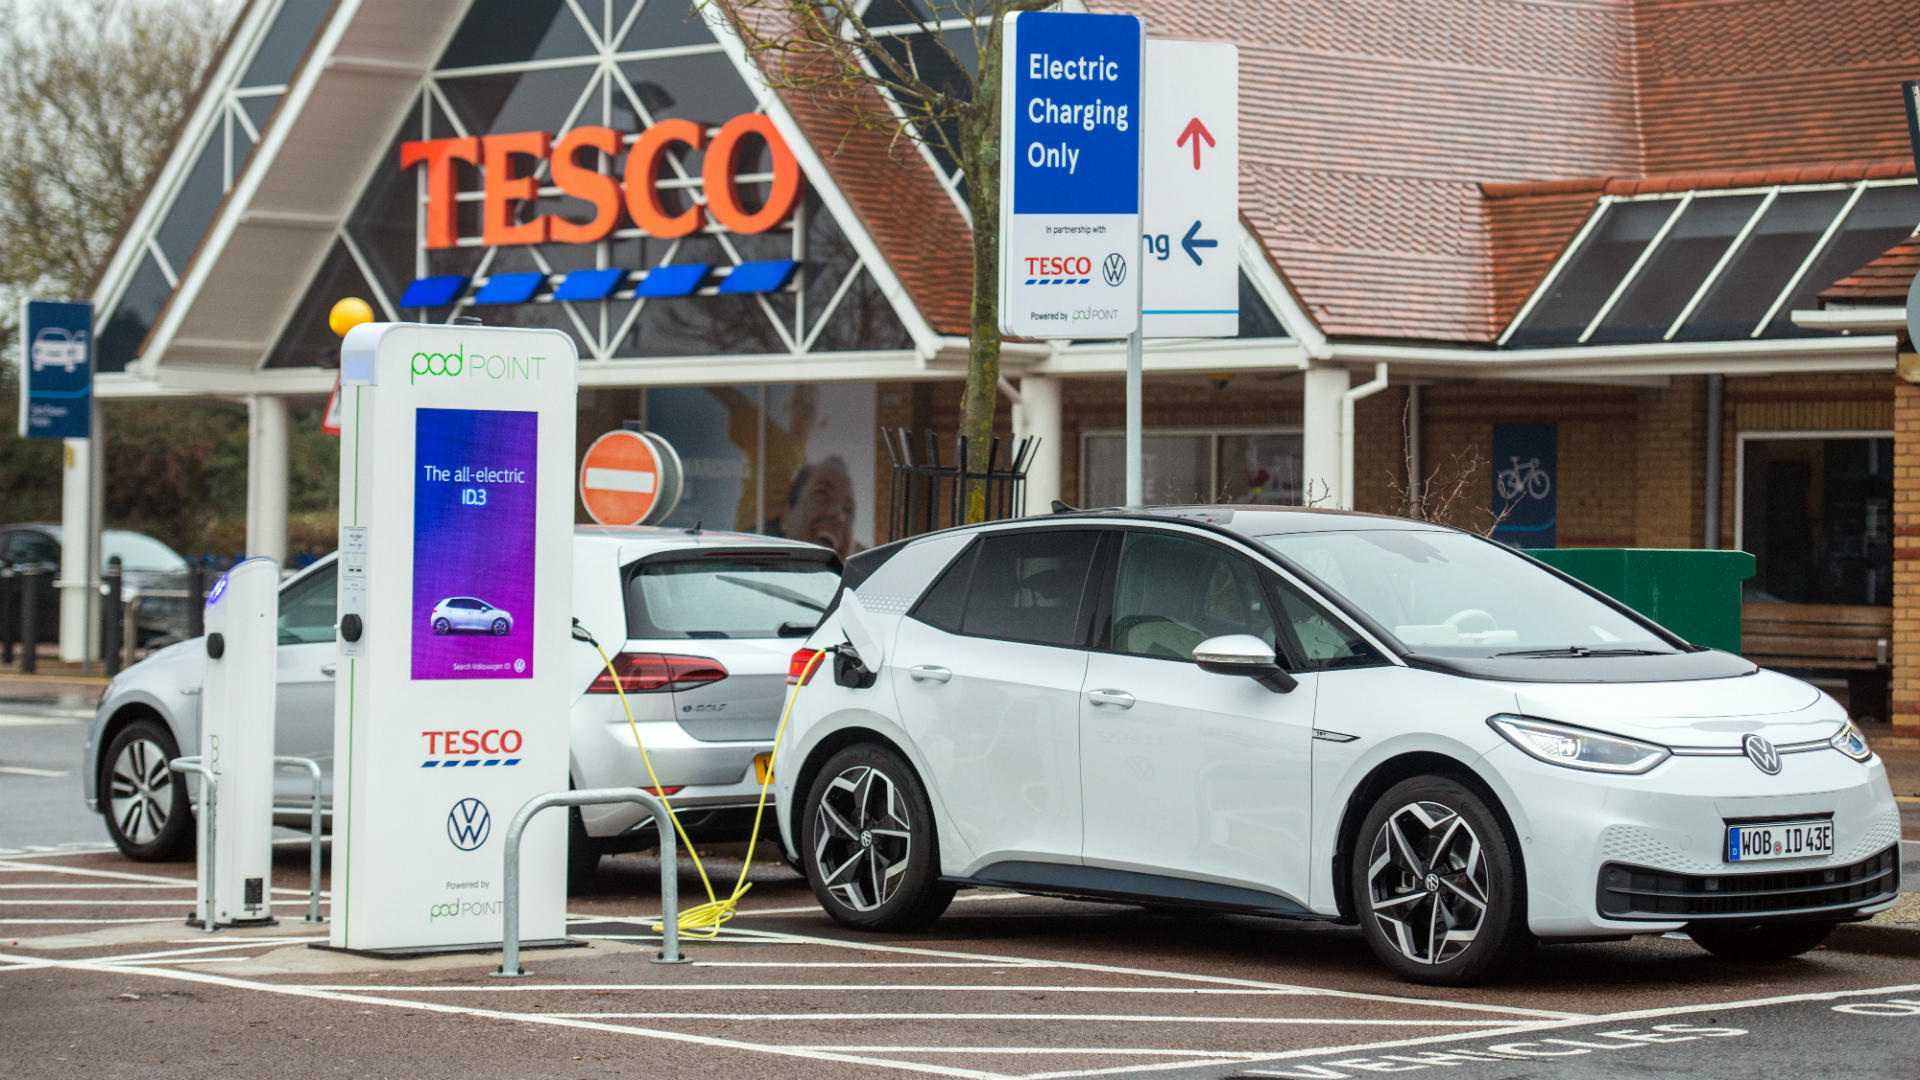 Electric car owners can charge for FREE at Tesco